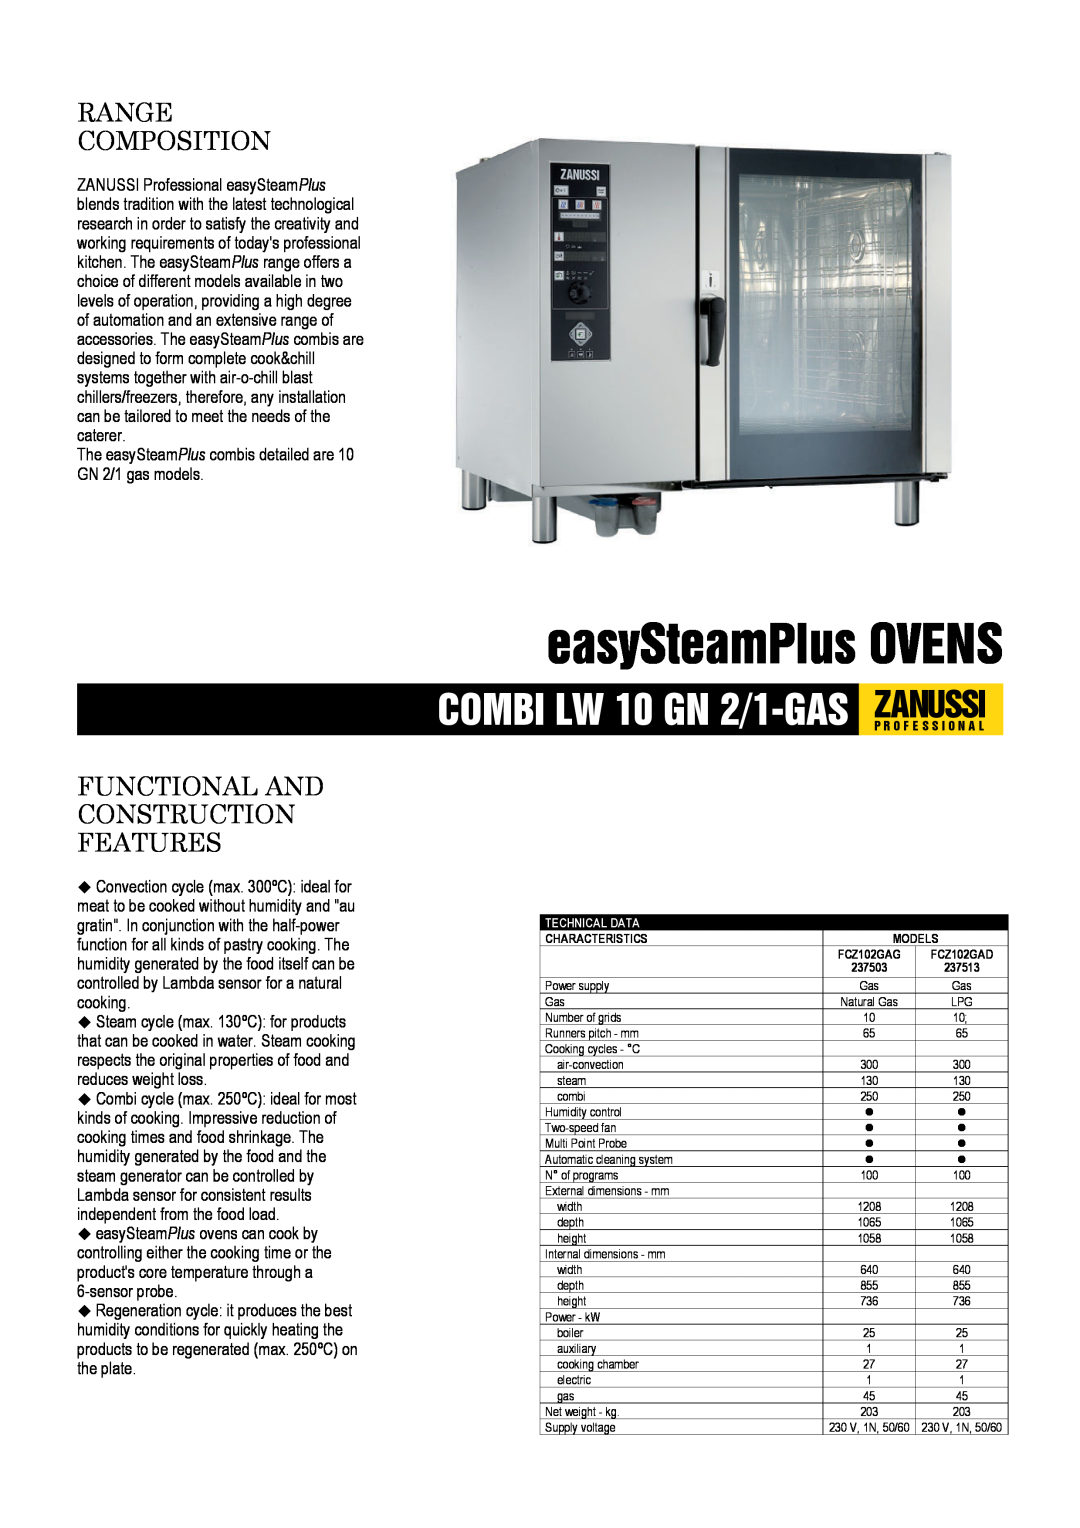 Zanussi FCZ102GAD, FCZ102GAG dimensions easySteamPlus OVENS, Range Composition, Functional And Construction Features 